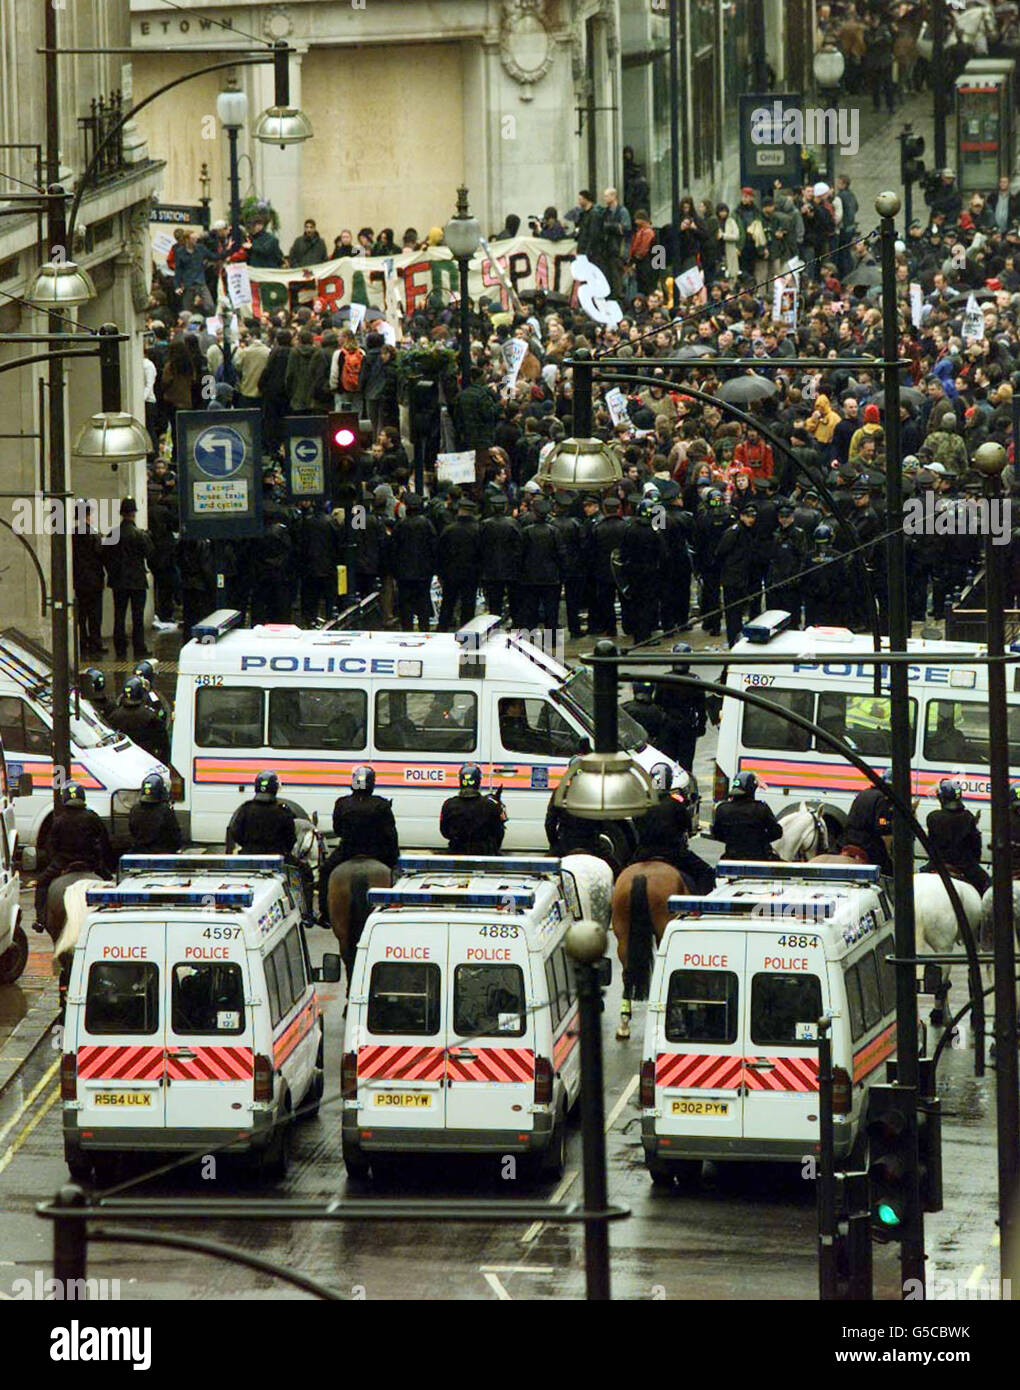 vanter En nat Socialist Police using horses and vans block Oxford Street - one of London's main  shopping streets - at Oxford Circus where protesters converged during a day  of anti-capitalist action. Some 6,000 officers were